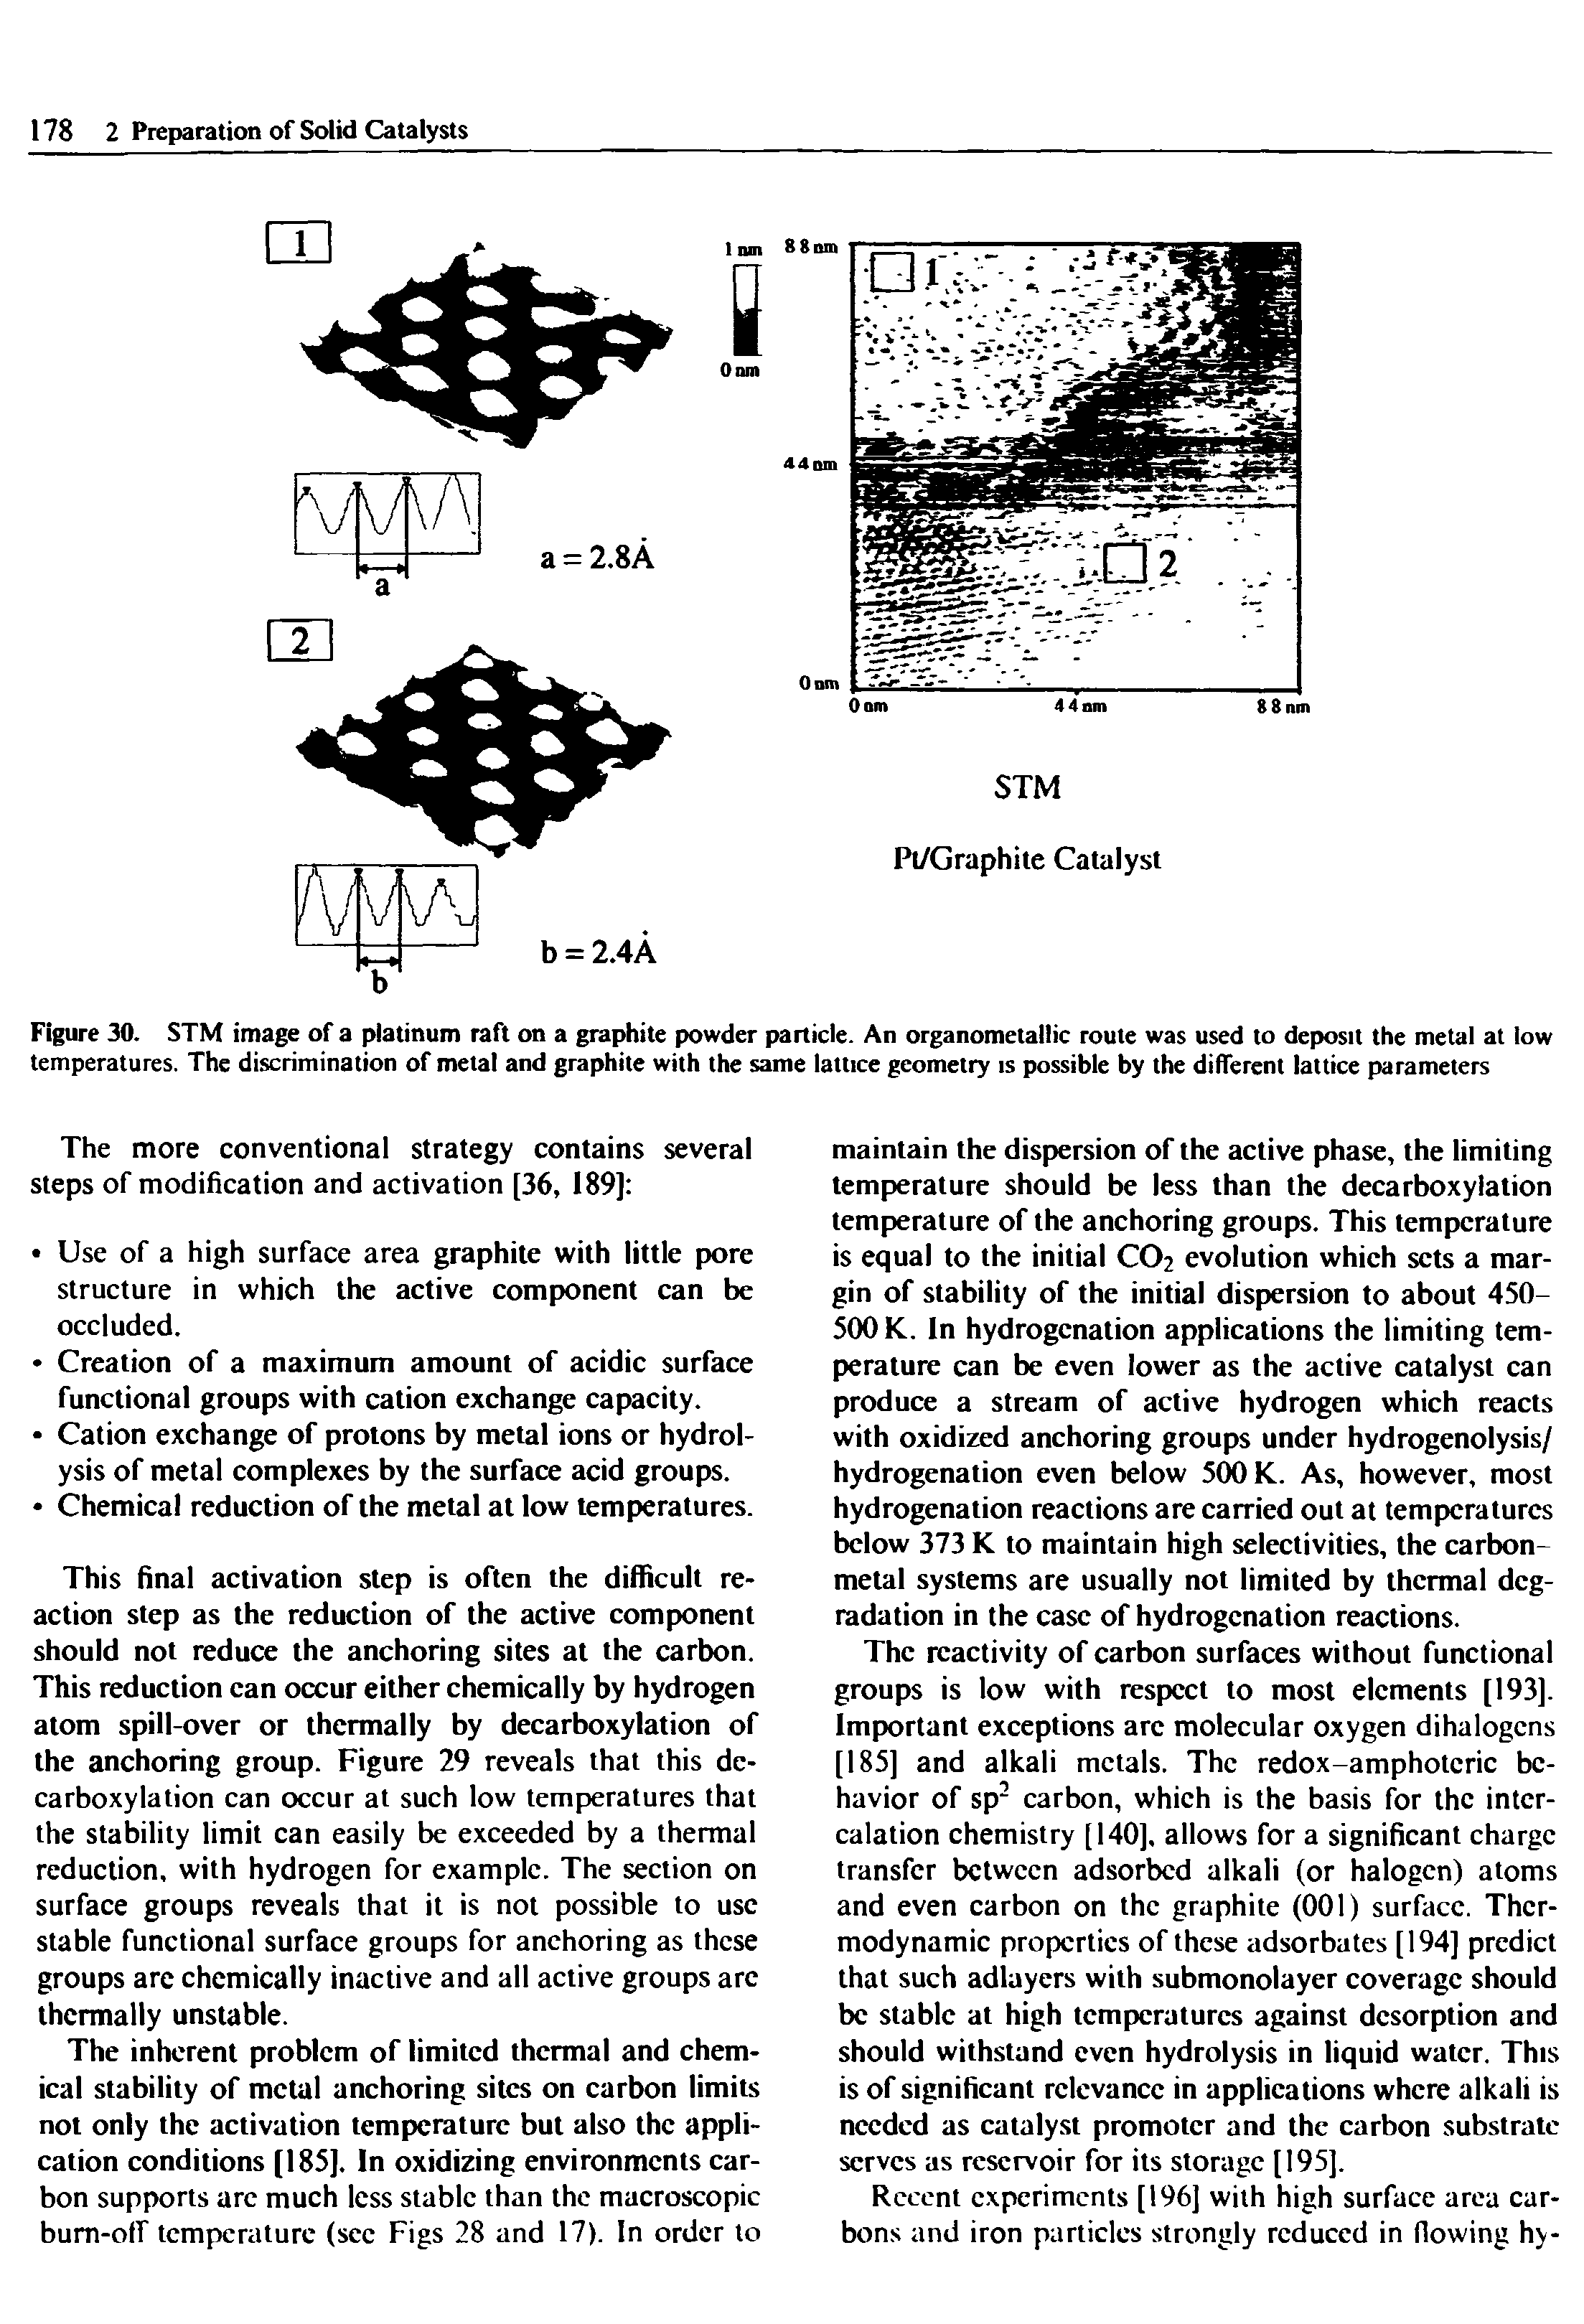 Figure 30. STM image of a platinum raft on a graphite powder particle. An organometallic route was used to deposit the metal at low temperatures. The discrimination of metal and graphite with the same lattice geometry is possible by the different lattice parameters...